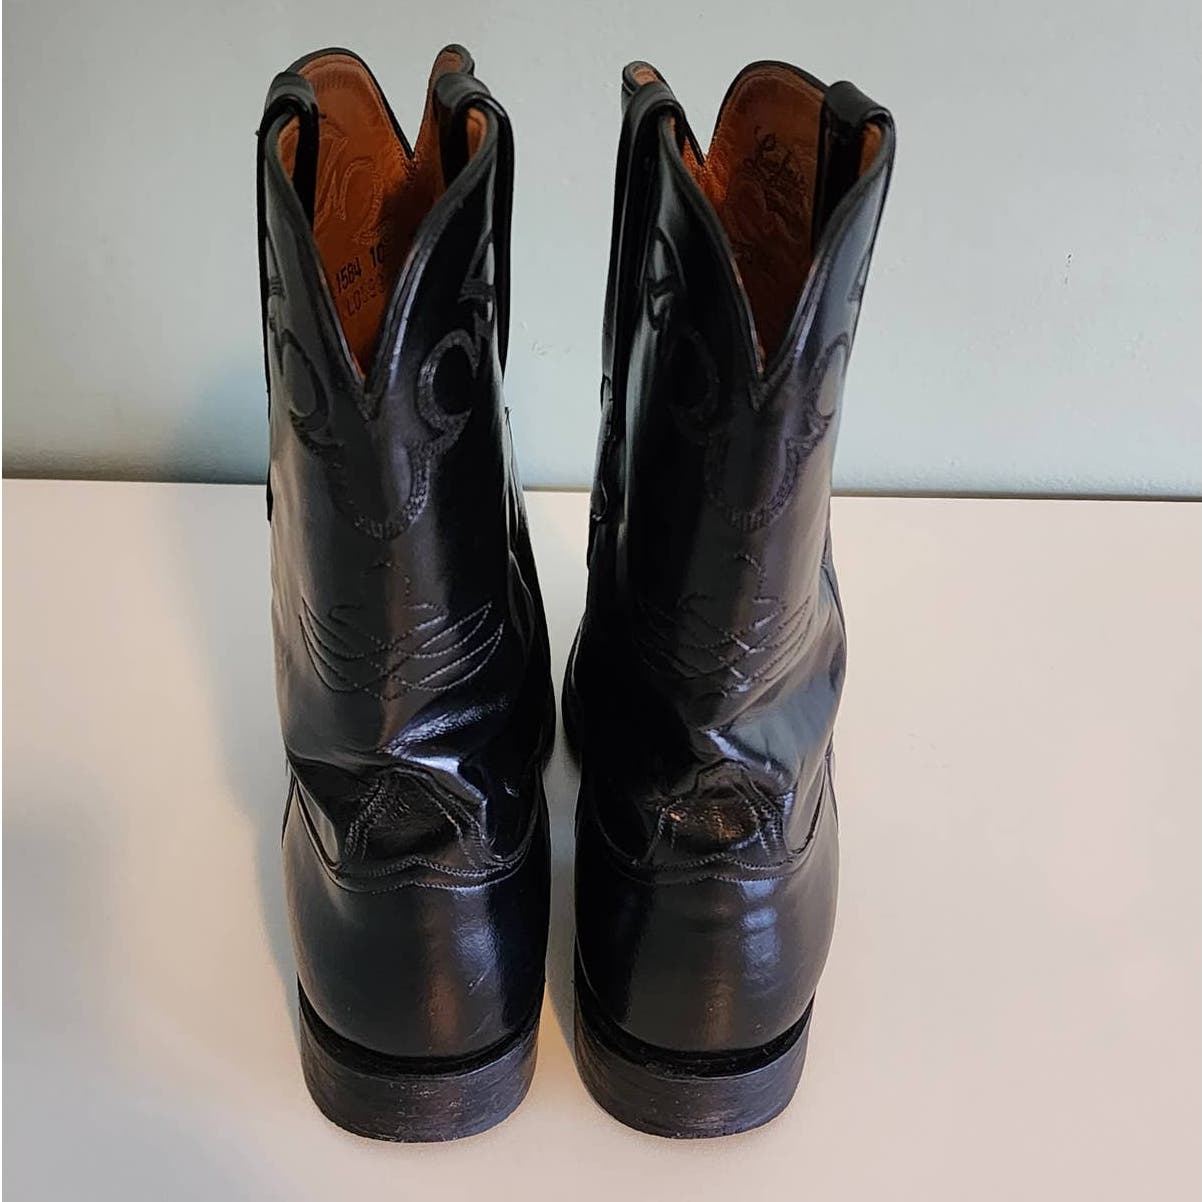 Lucchese Classic Black Cowboy Boots Men's Size 10 Style 1584